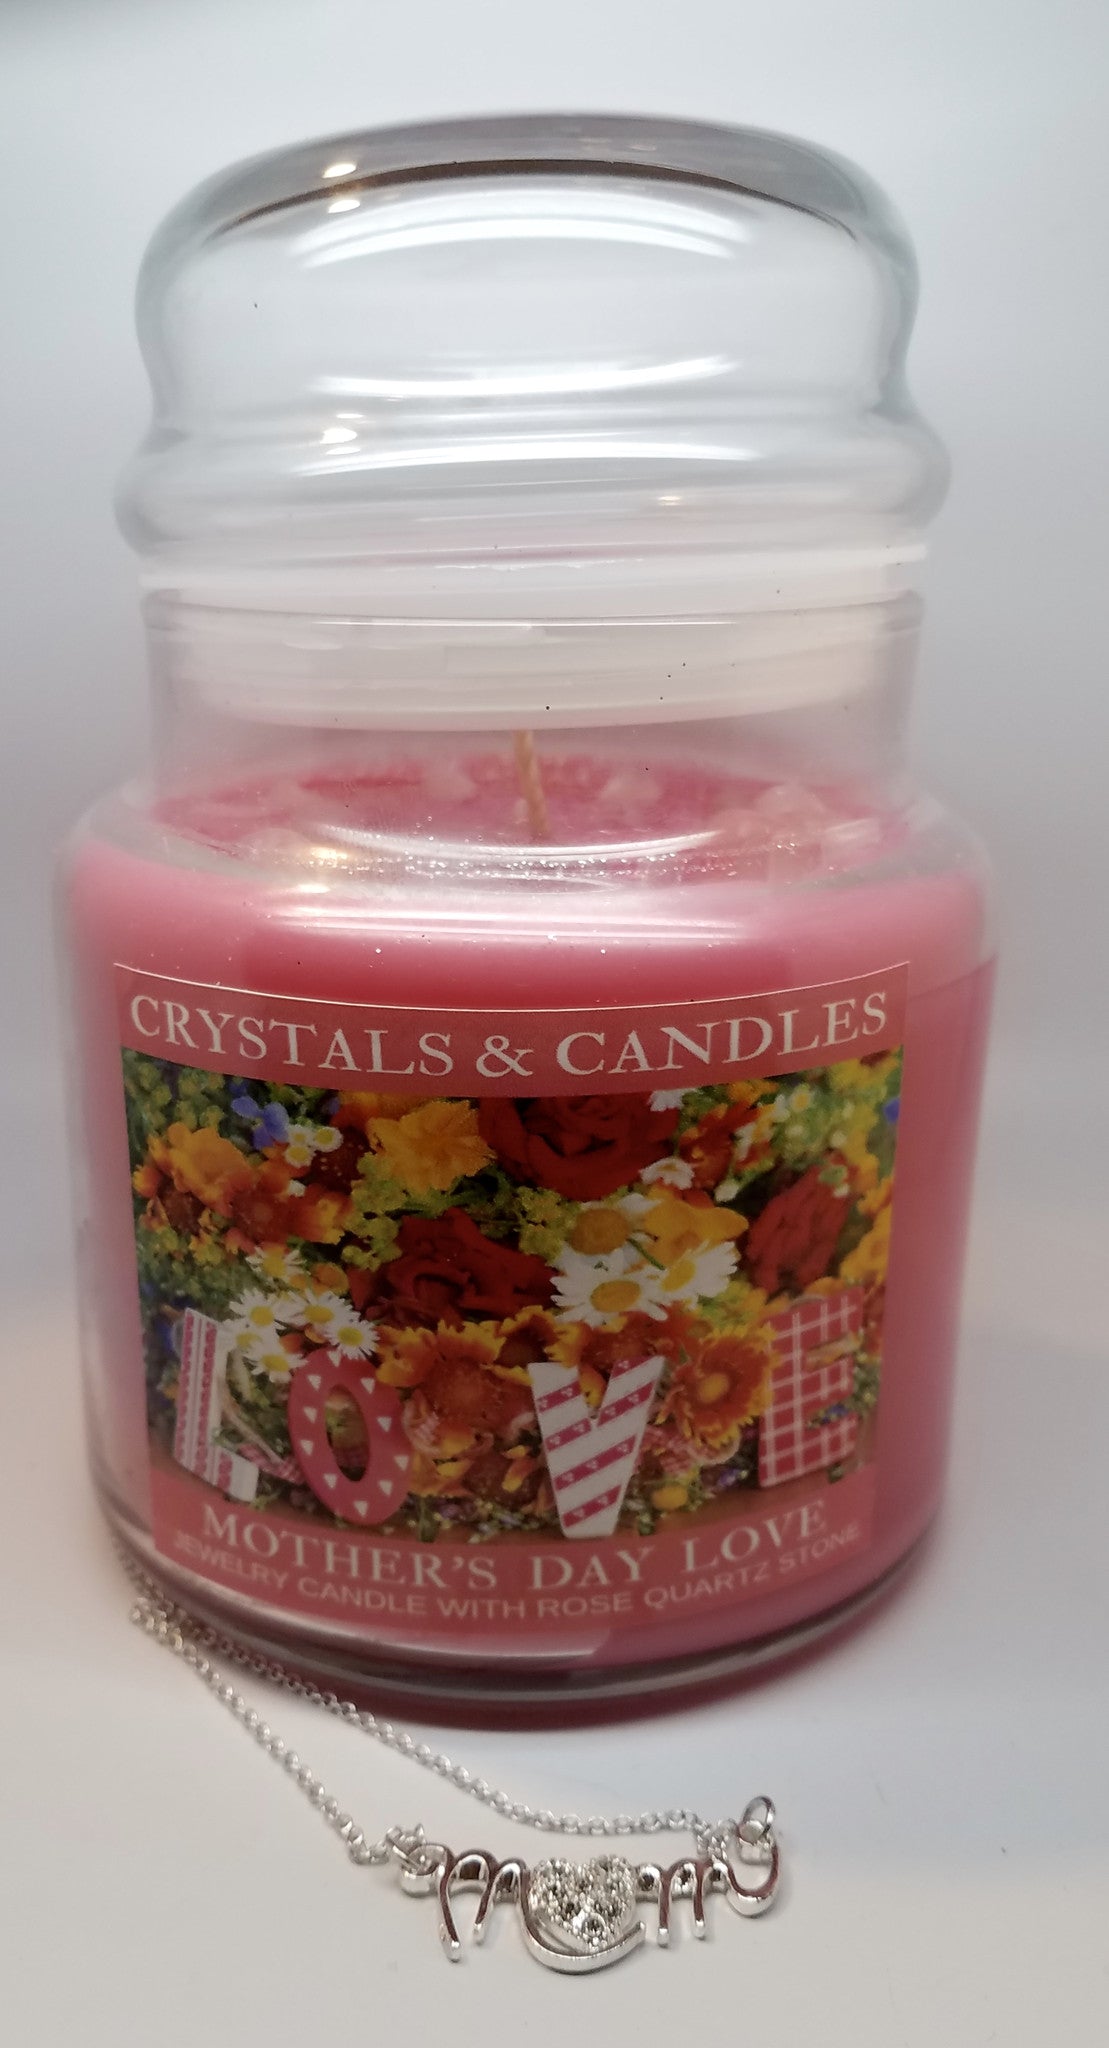 Mother's Day Love - Jewelry Crystal Candle With Rose Quartz